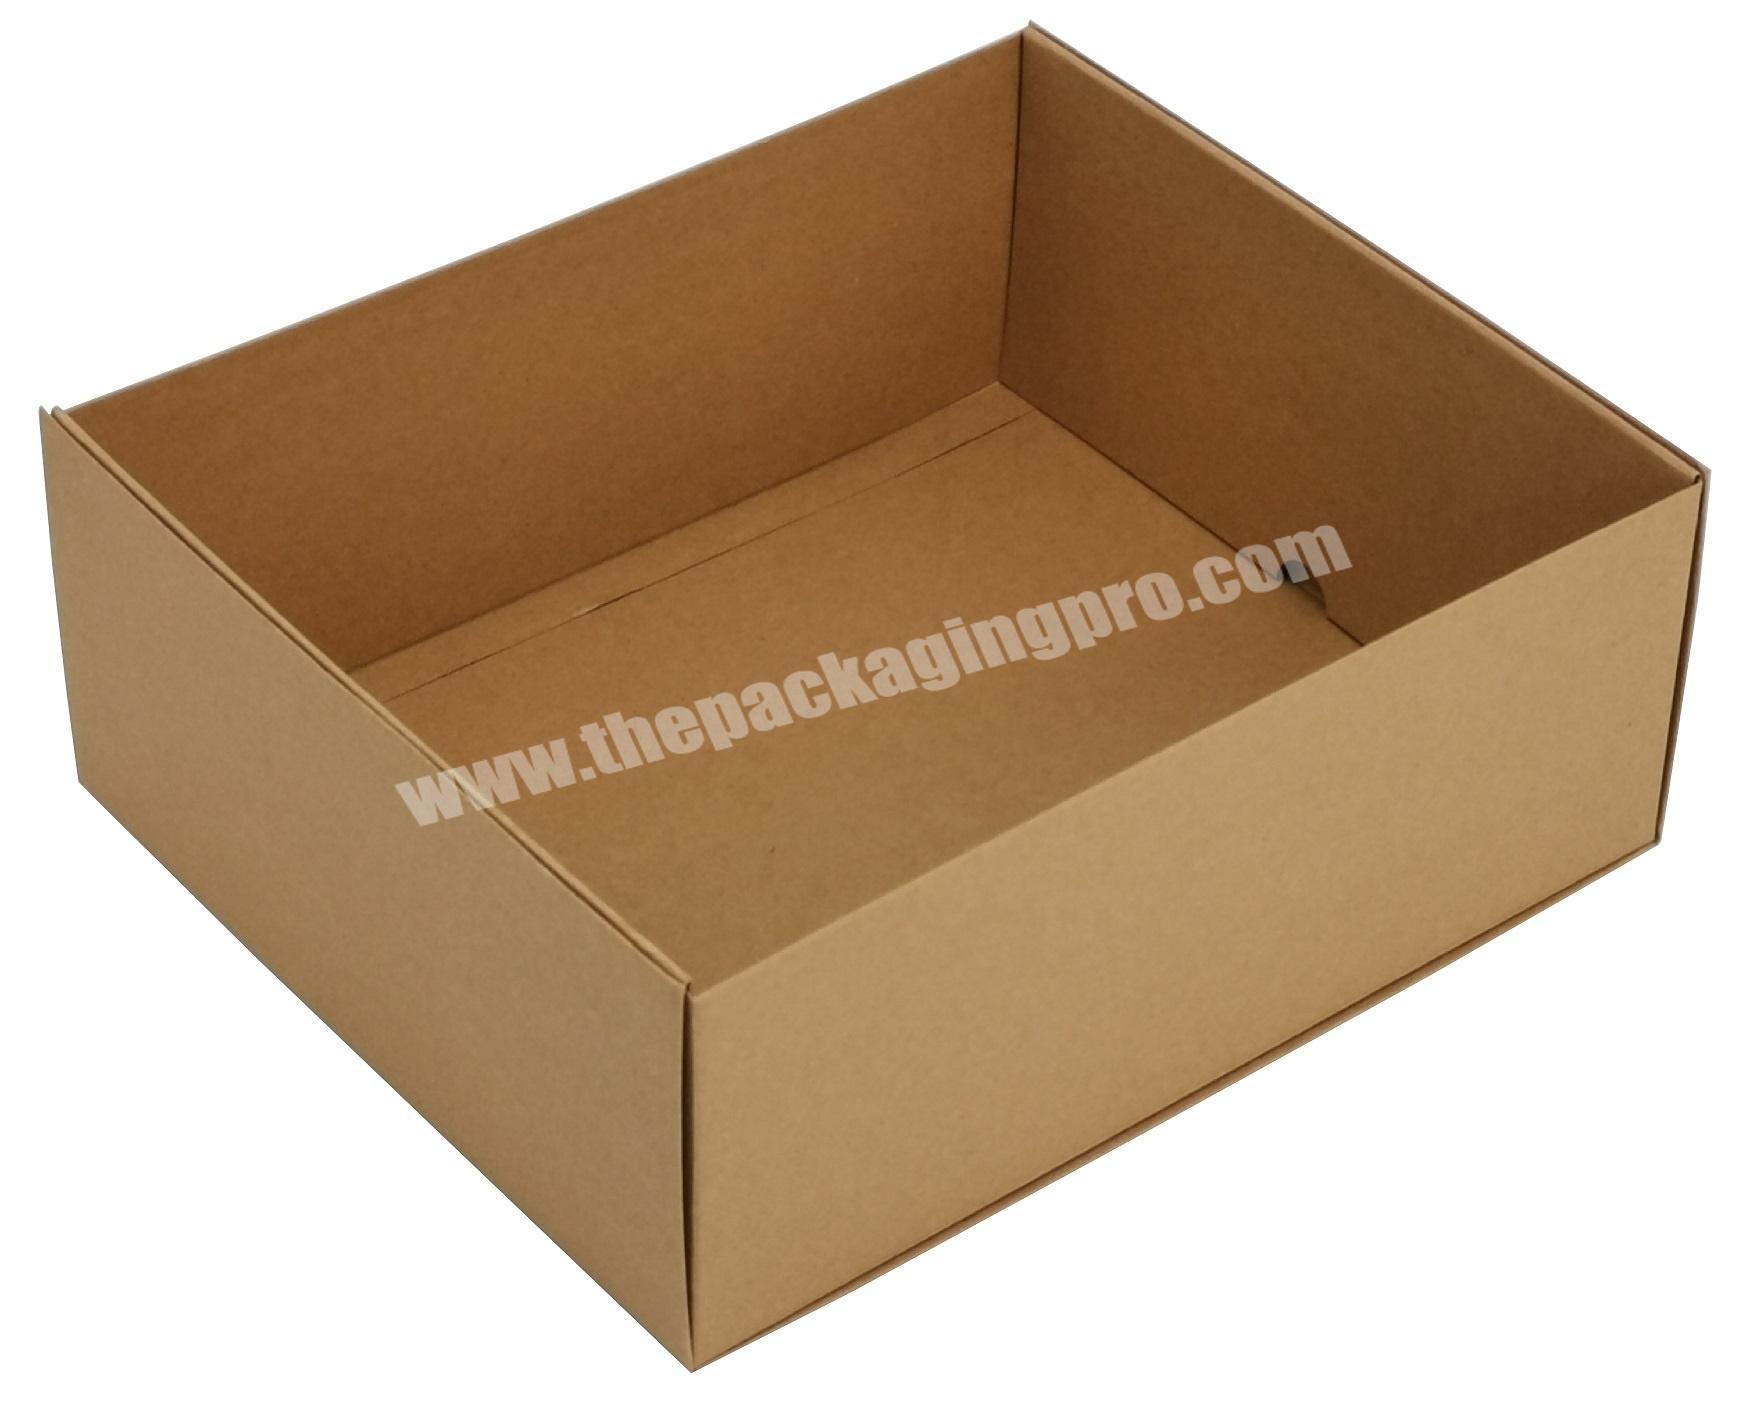 Folding Brown Kraft Rigid Cardboard Tray Packaging Box Suitable For Making Foldable Lid and Base Two Pieces Box